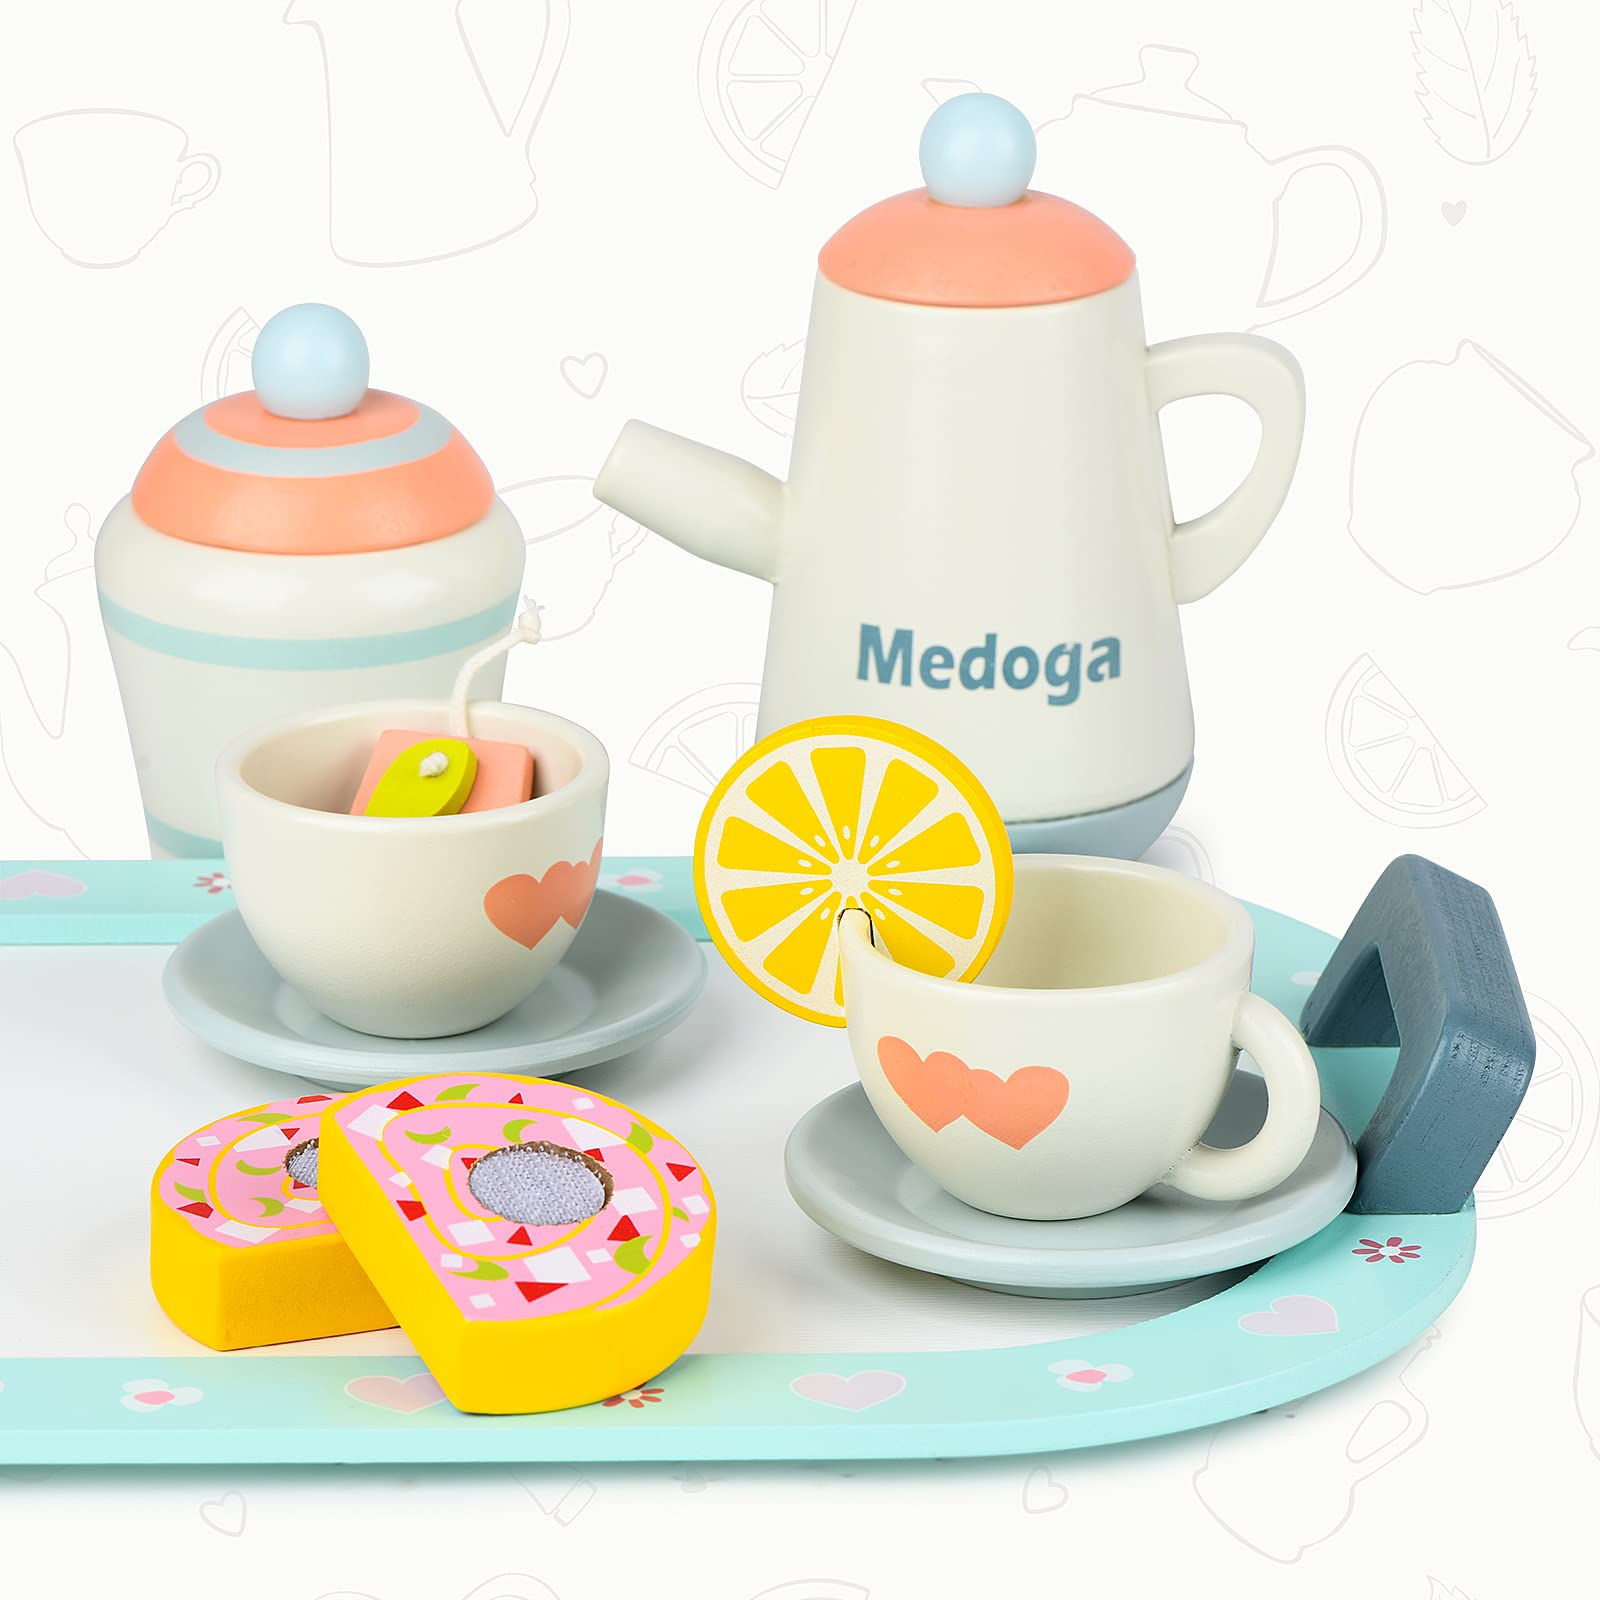 Wooden Tea Set toy Play Kitchen Accessories for Kids Pretend Play Food for Toddlers Tea Party Set for 3, 4, 5 Year Old Girls and Boys (Tea Set)